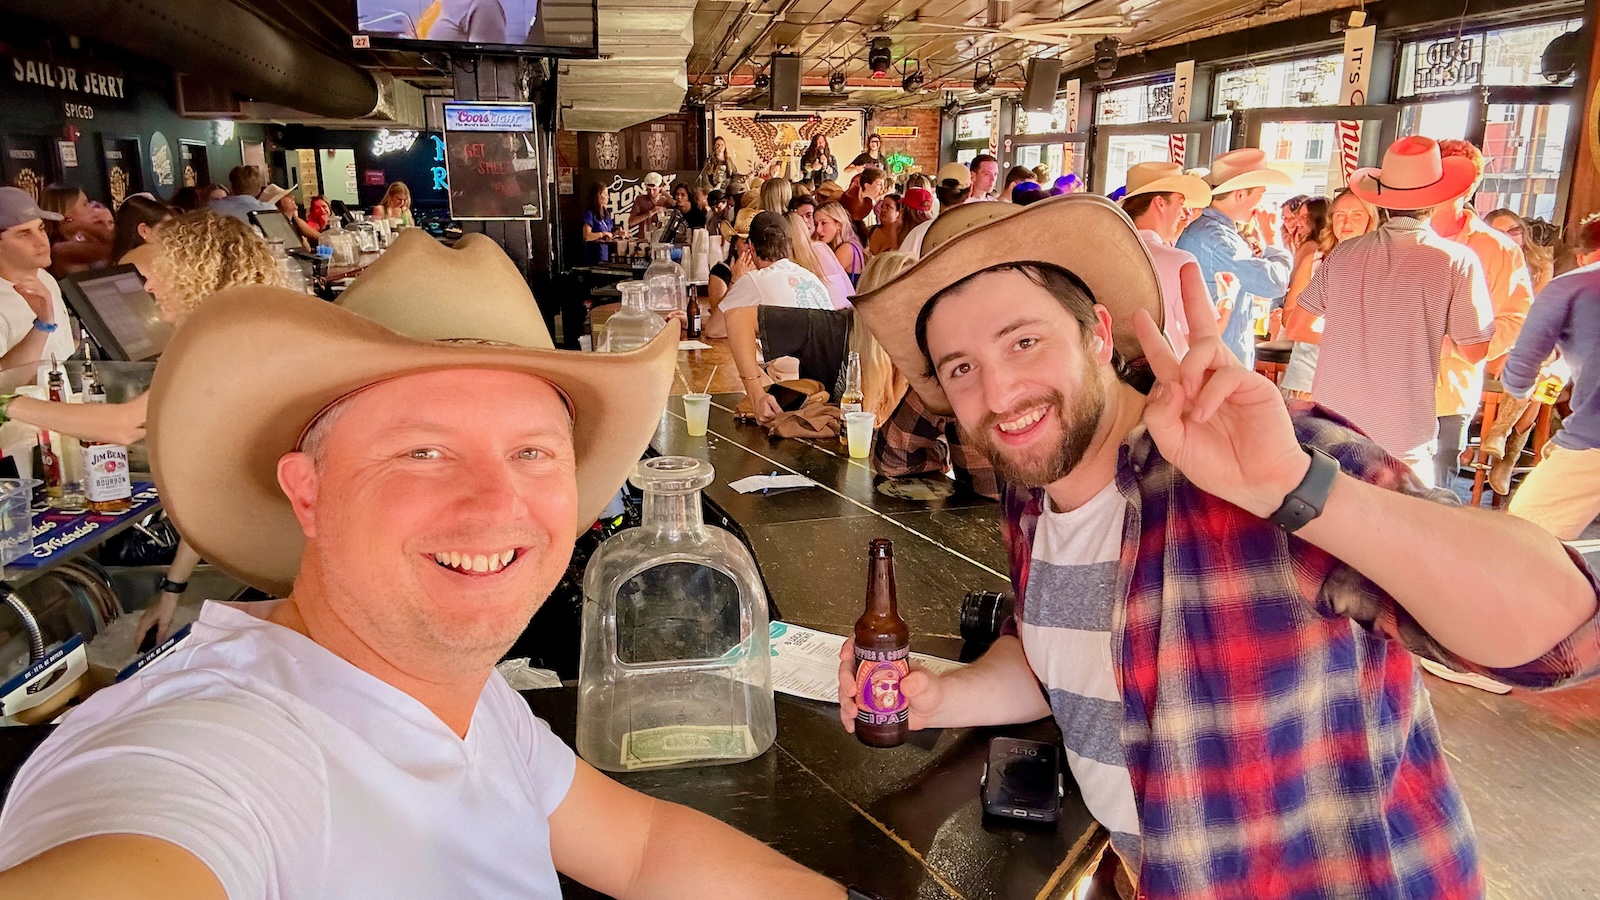 Two men in a bar wearing cowboy hats. Party behind them.